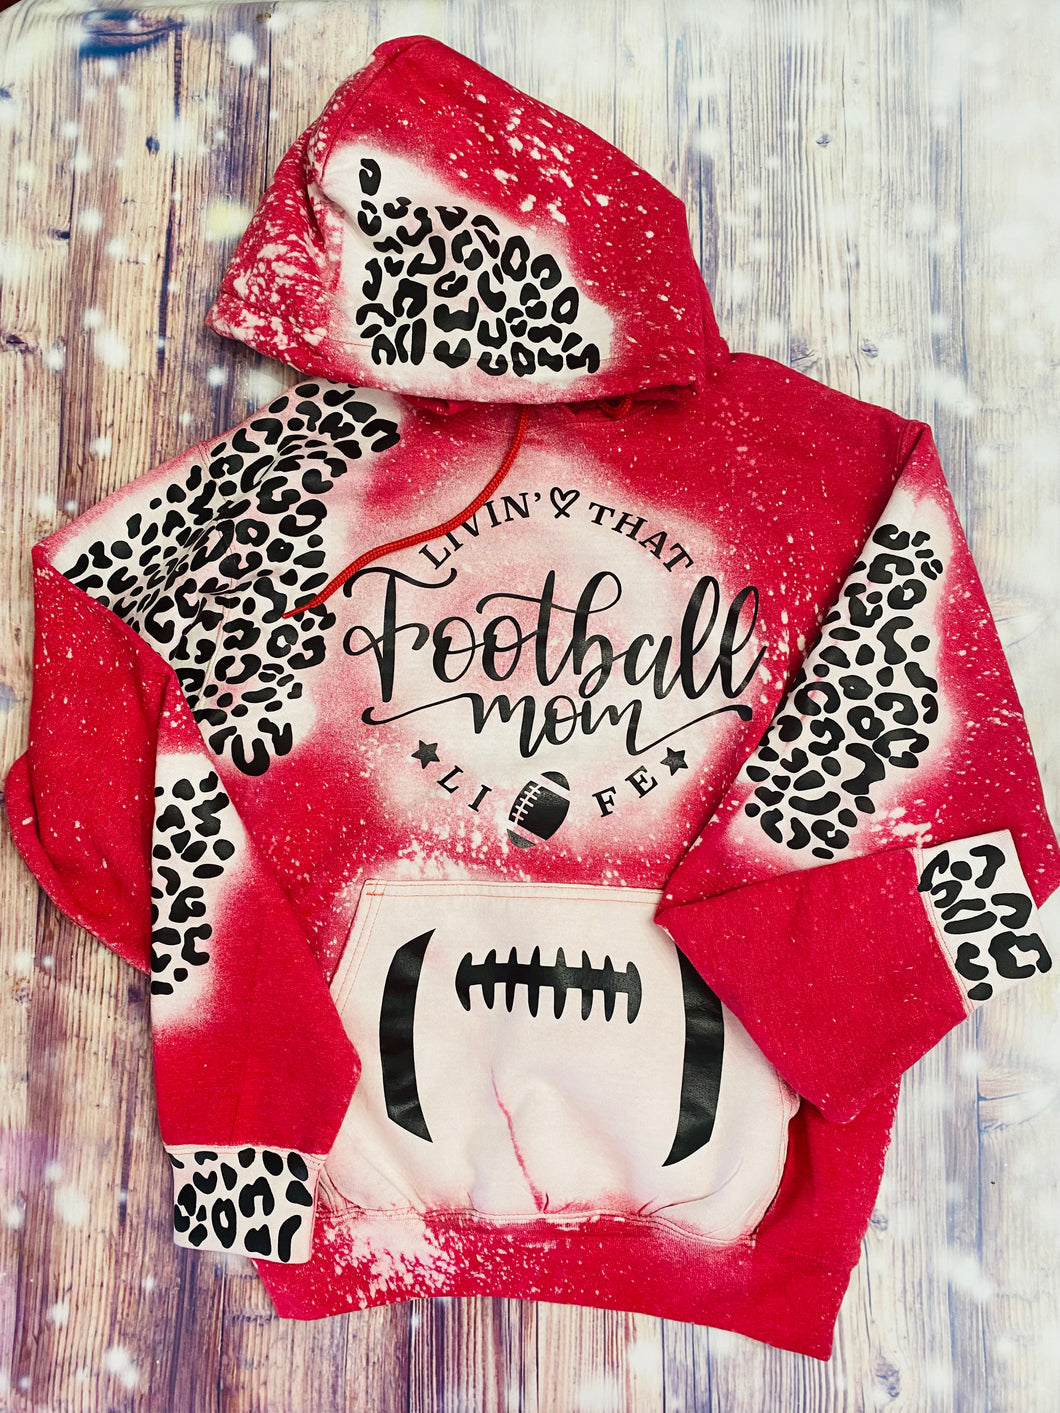 Livin’ That Football Mom Life Red Bleached Leopard Hoodie - Mavictoria Designs Hot Press Express